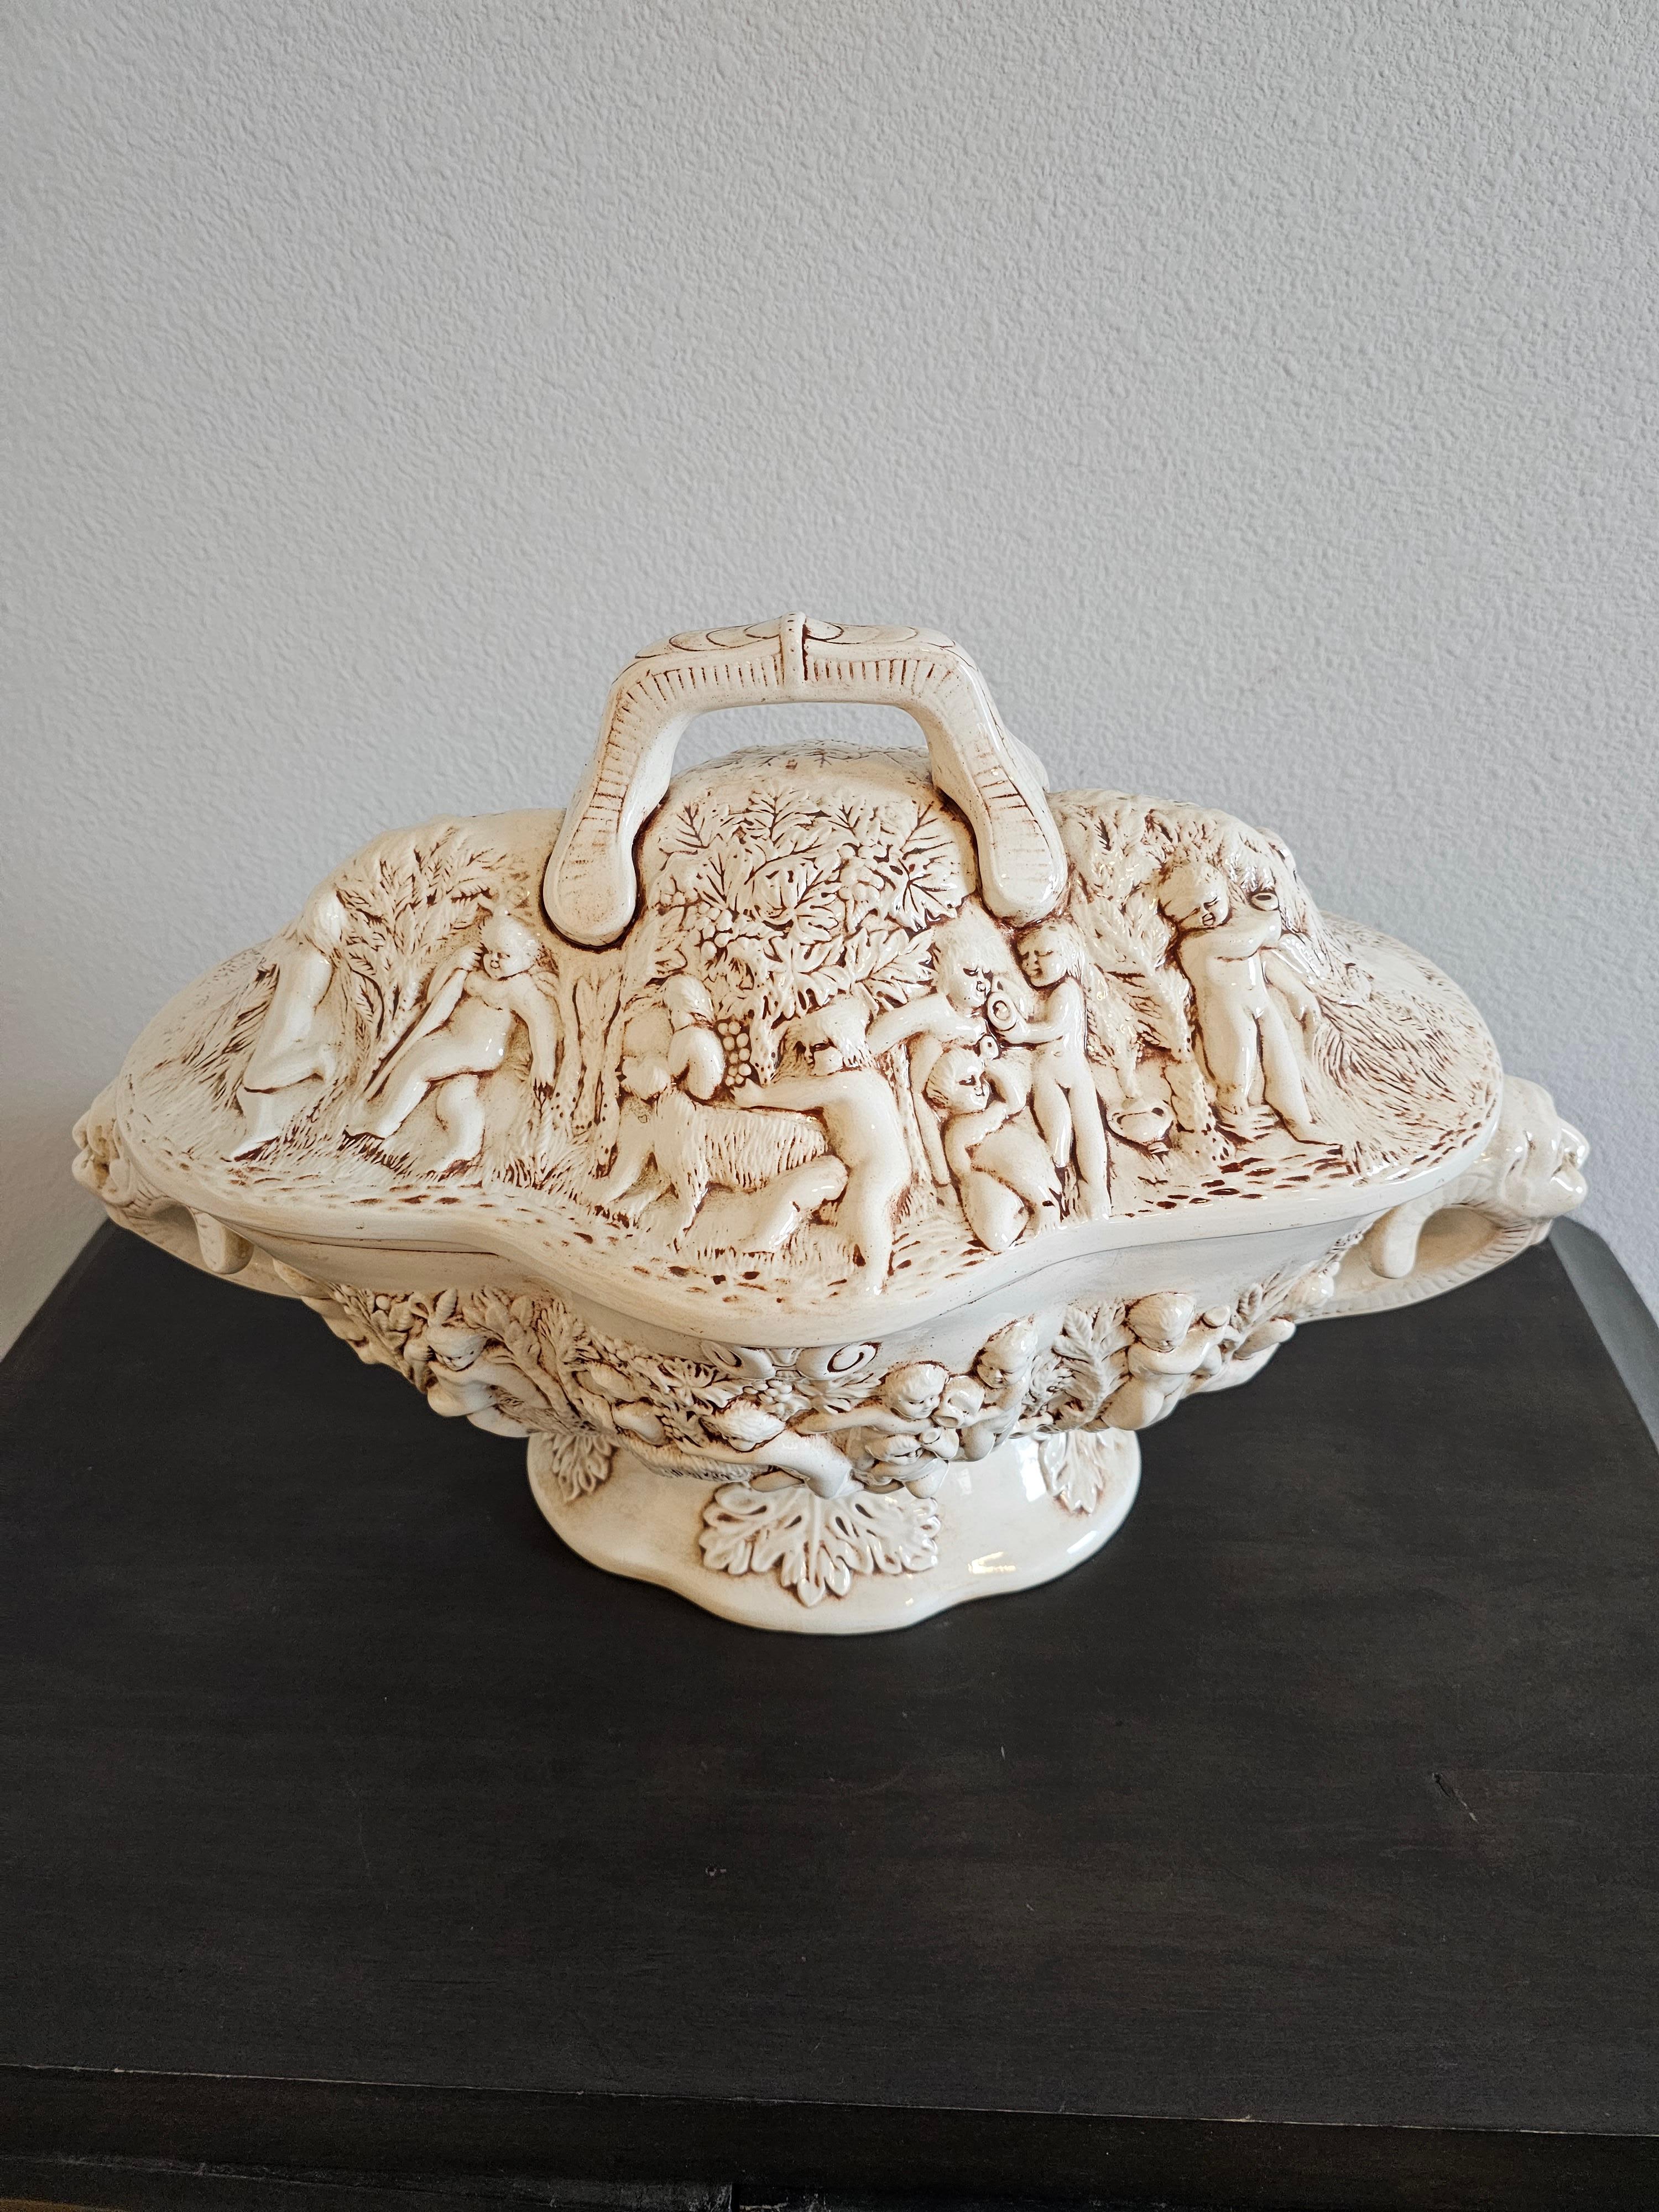 Vintage Italian Capodimonte Porcelain Covered Serving Dish Large Soup Tureen For Sale 4